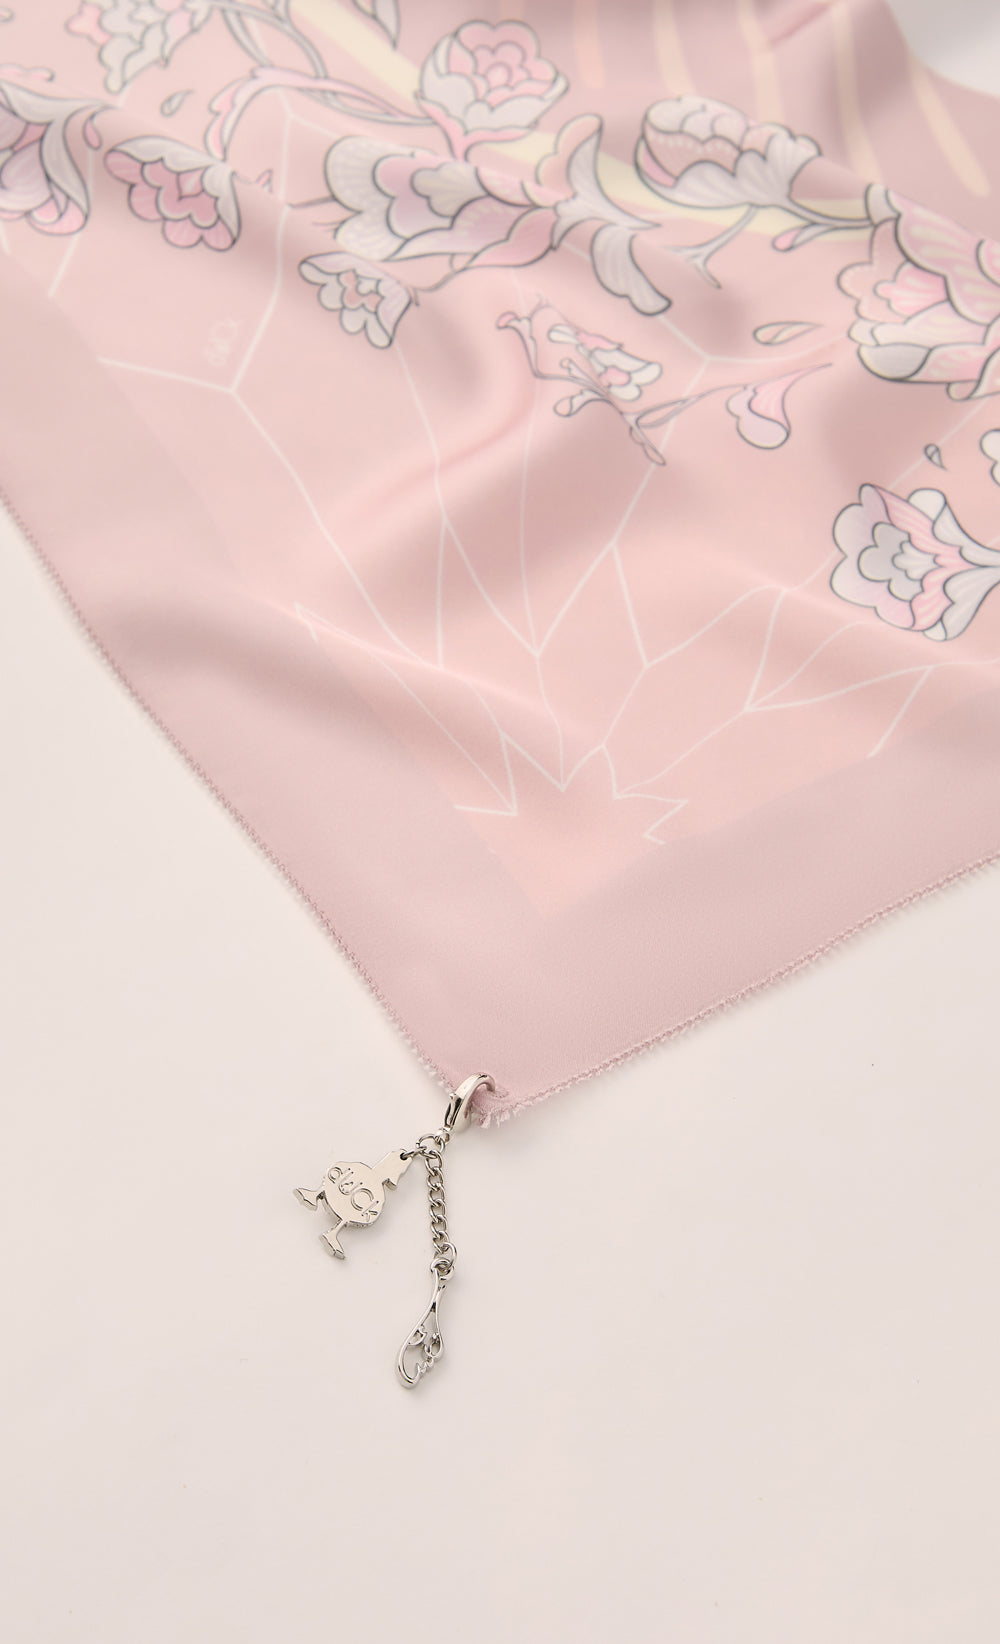 The Nisa dUCk Square Scarf in Safiyyah